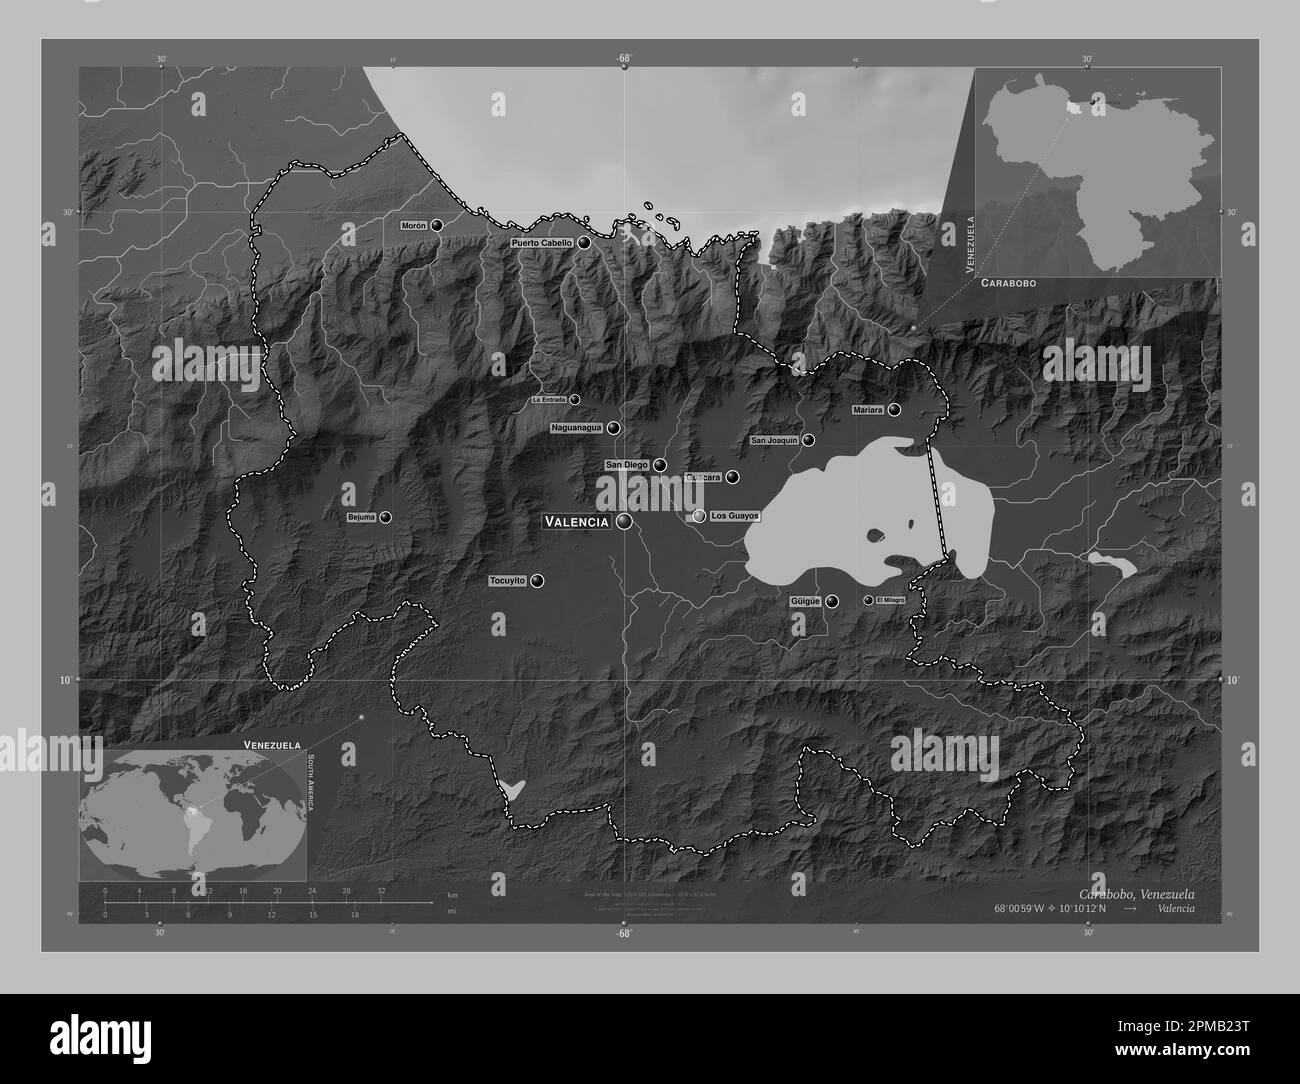 Carabobo, state of Venezuela. Grayscale elevation map with lakes and rivers. Locations and names of major cities of the region. Corner auxiliary locat Stock Photo